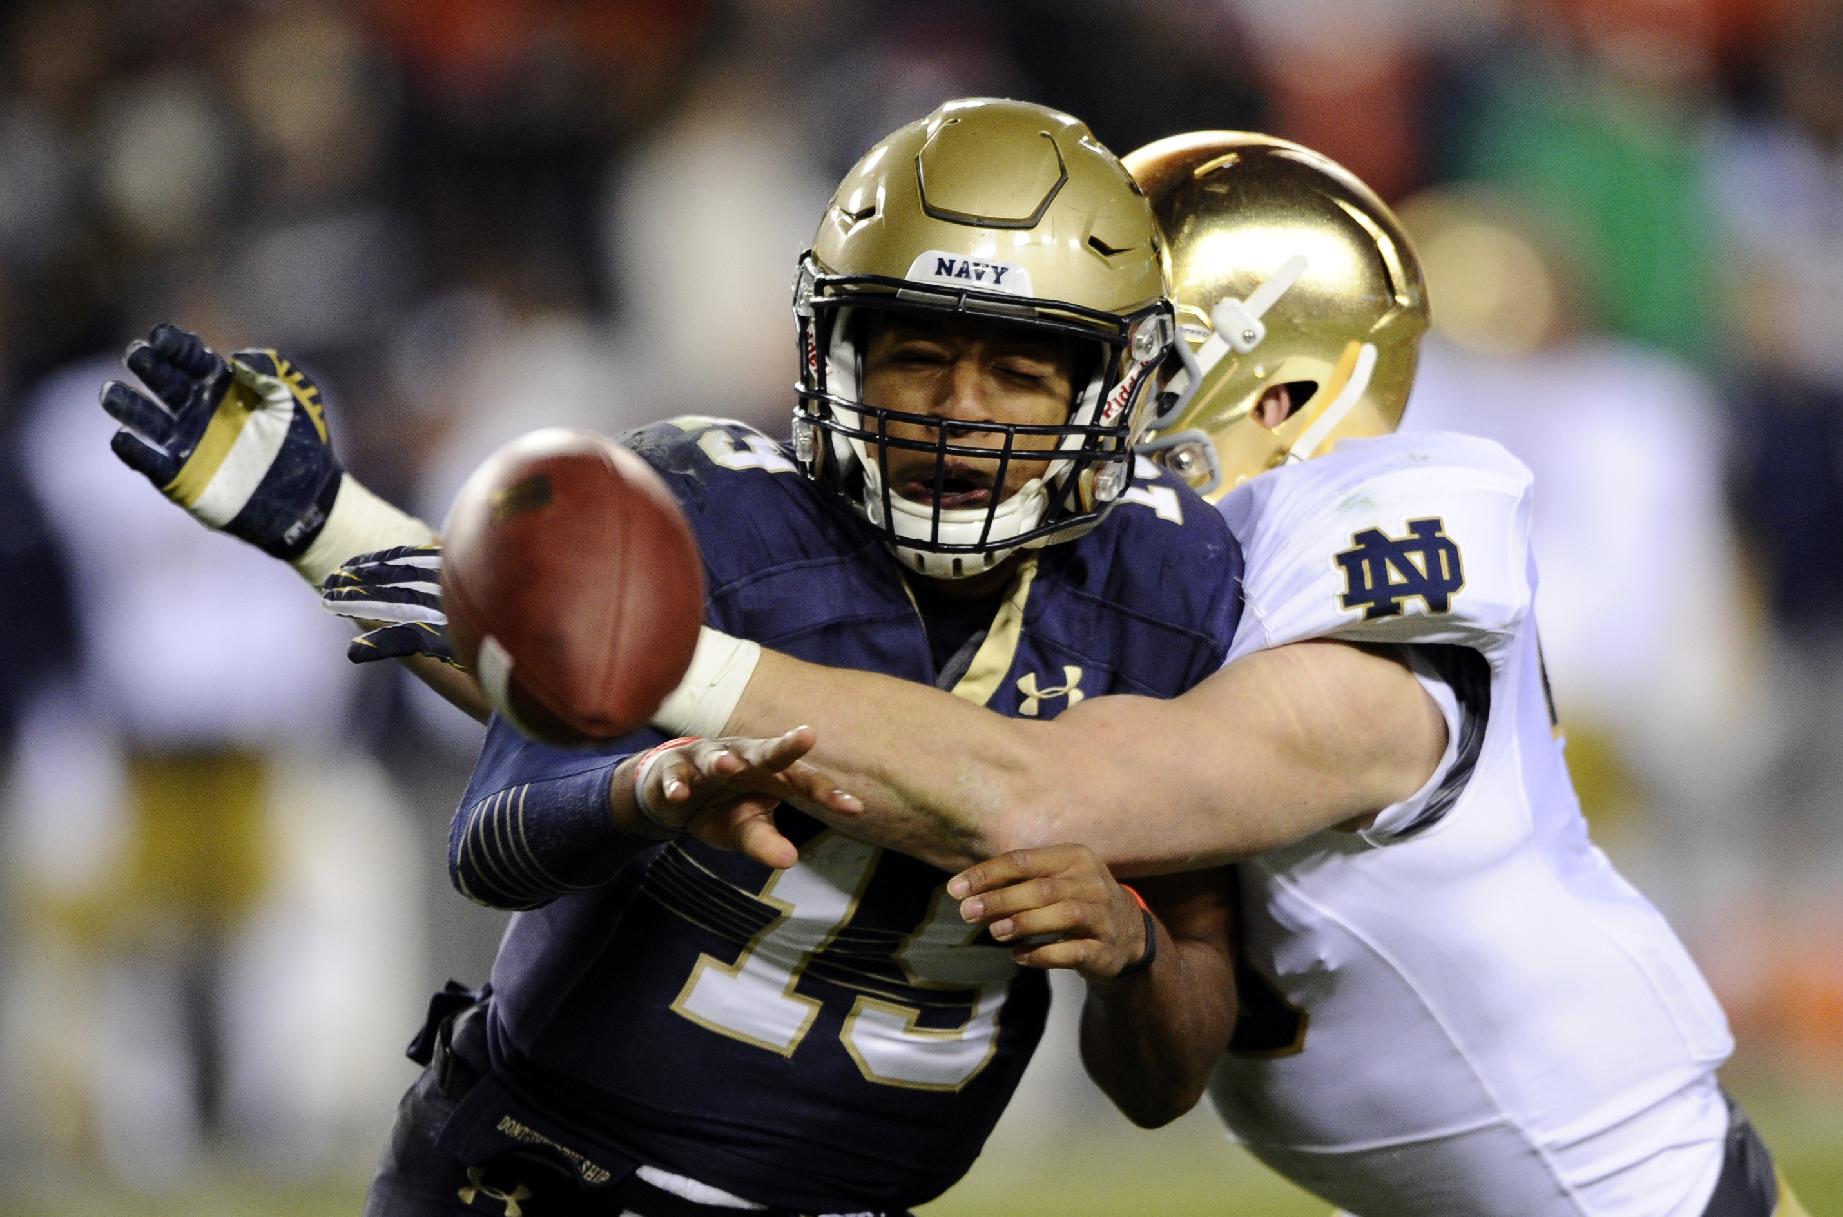 Navy quarterback Keenan Reynolds (19) pitches the ball as he is hit by a Notre Dame defender during the first half of an NCAA college football game, Saturday, Nov. 1, 2014, in Landover, Md. (AP Photo/Nick Wass)